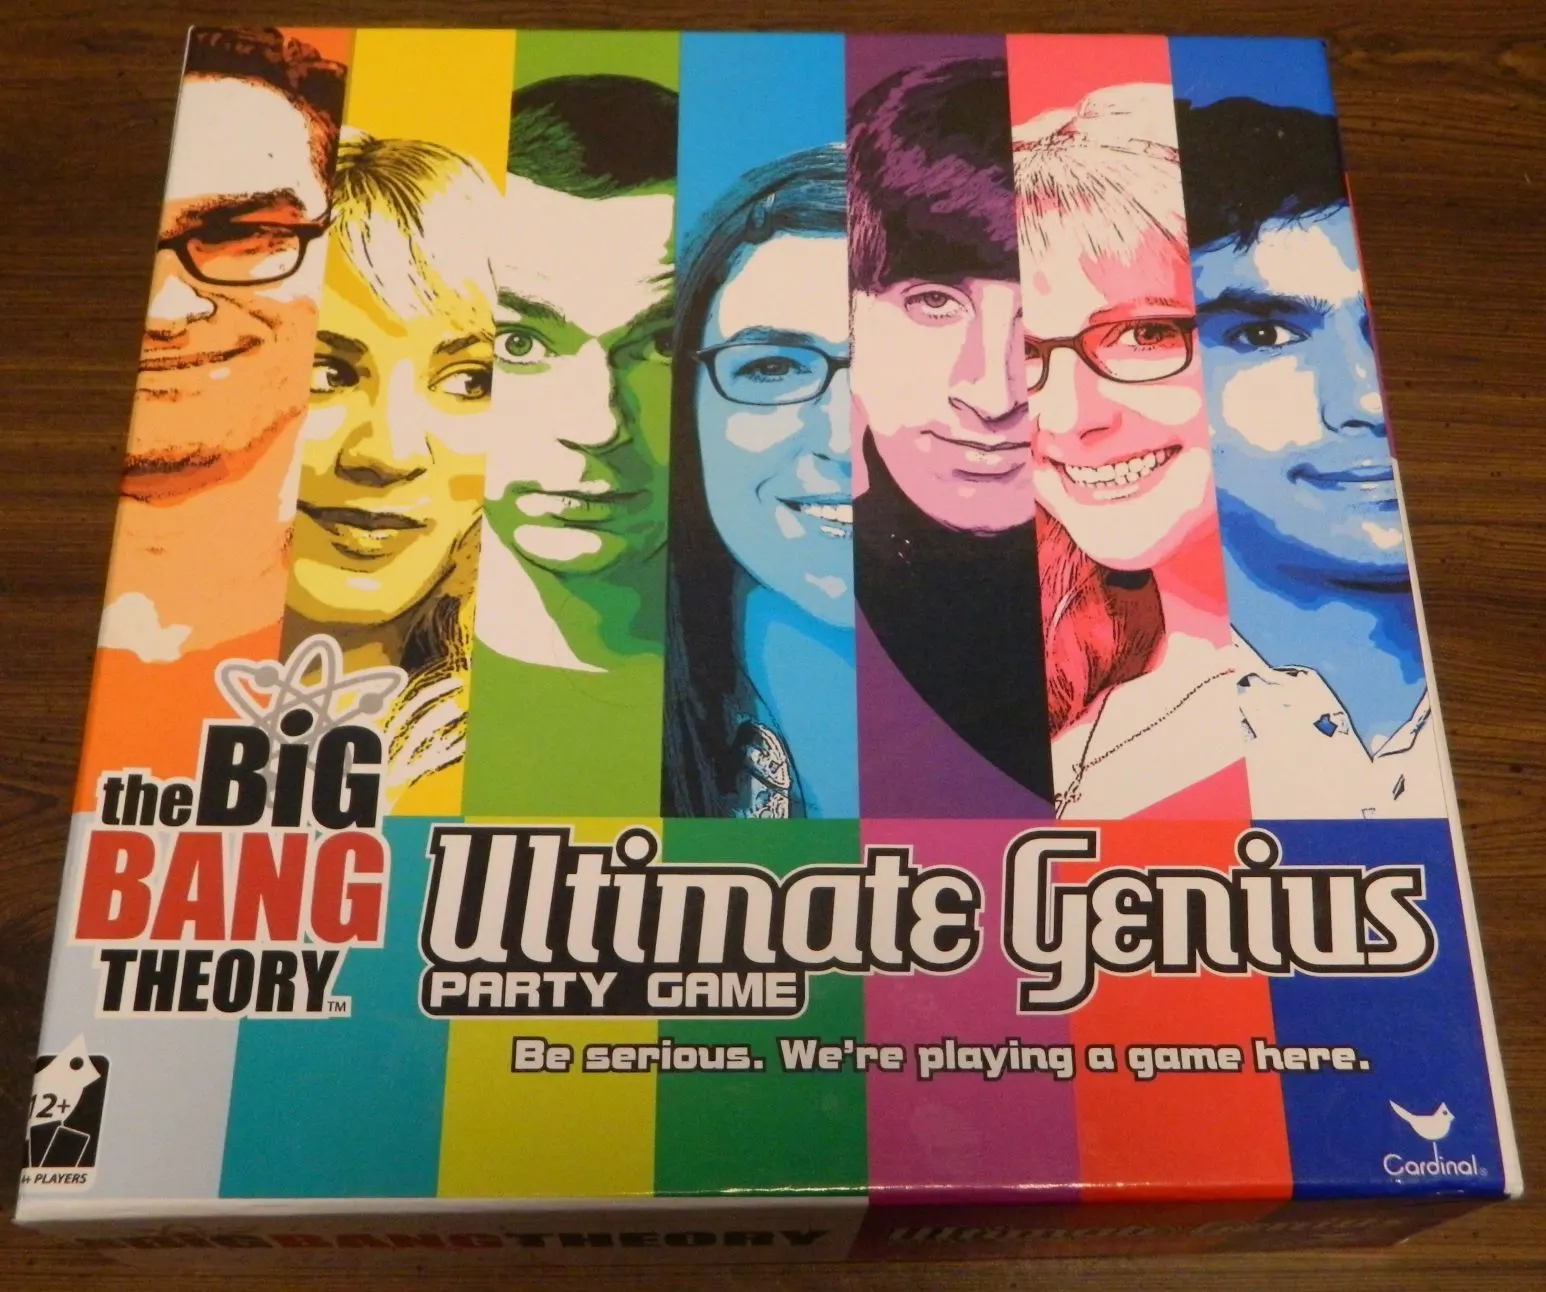 Box for The Big Bang Theory Ultimate Genius Party Game